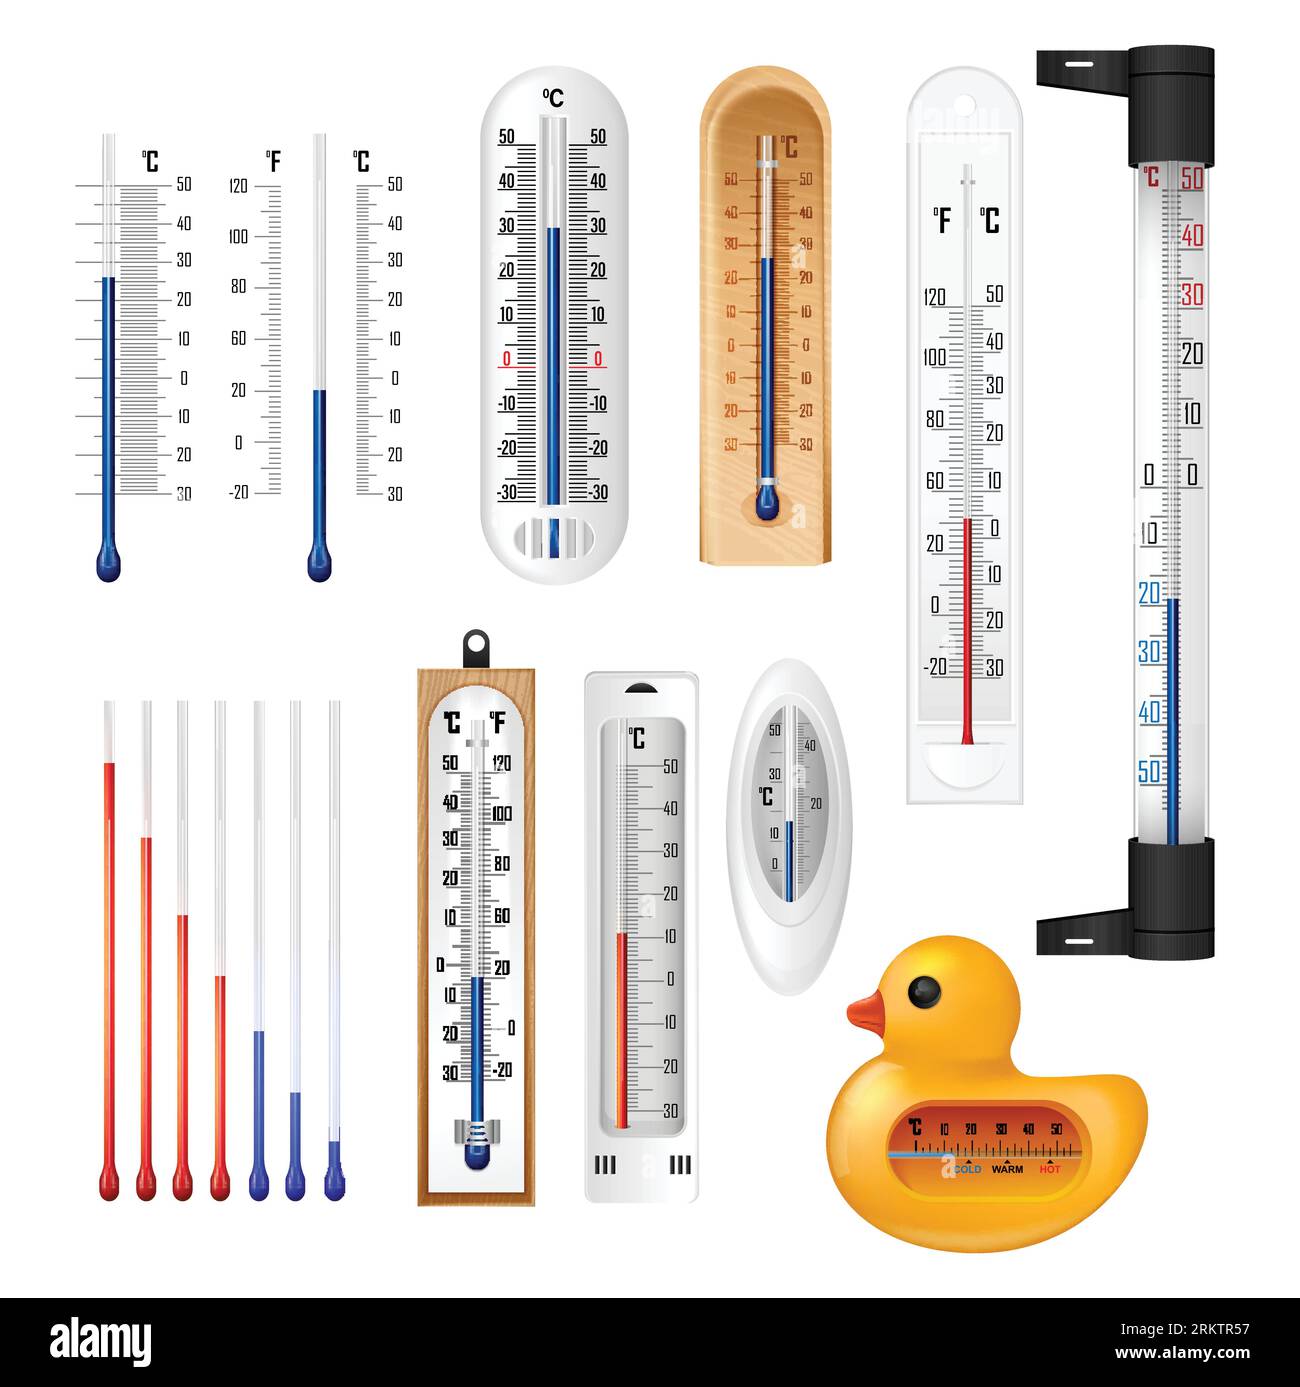 https://c8.alamy.com/comp/2RKTR57/realistic-meteorology-indoor-thermometer-set-with-isolated-images-of-household-temperature-meters-for-air-and-water-vector-illustration-2RKTR57.jpg